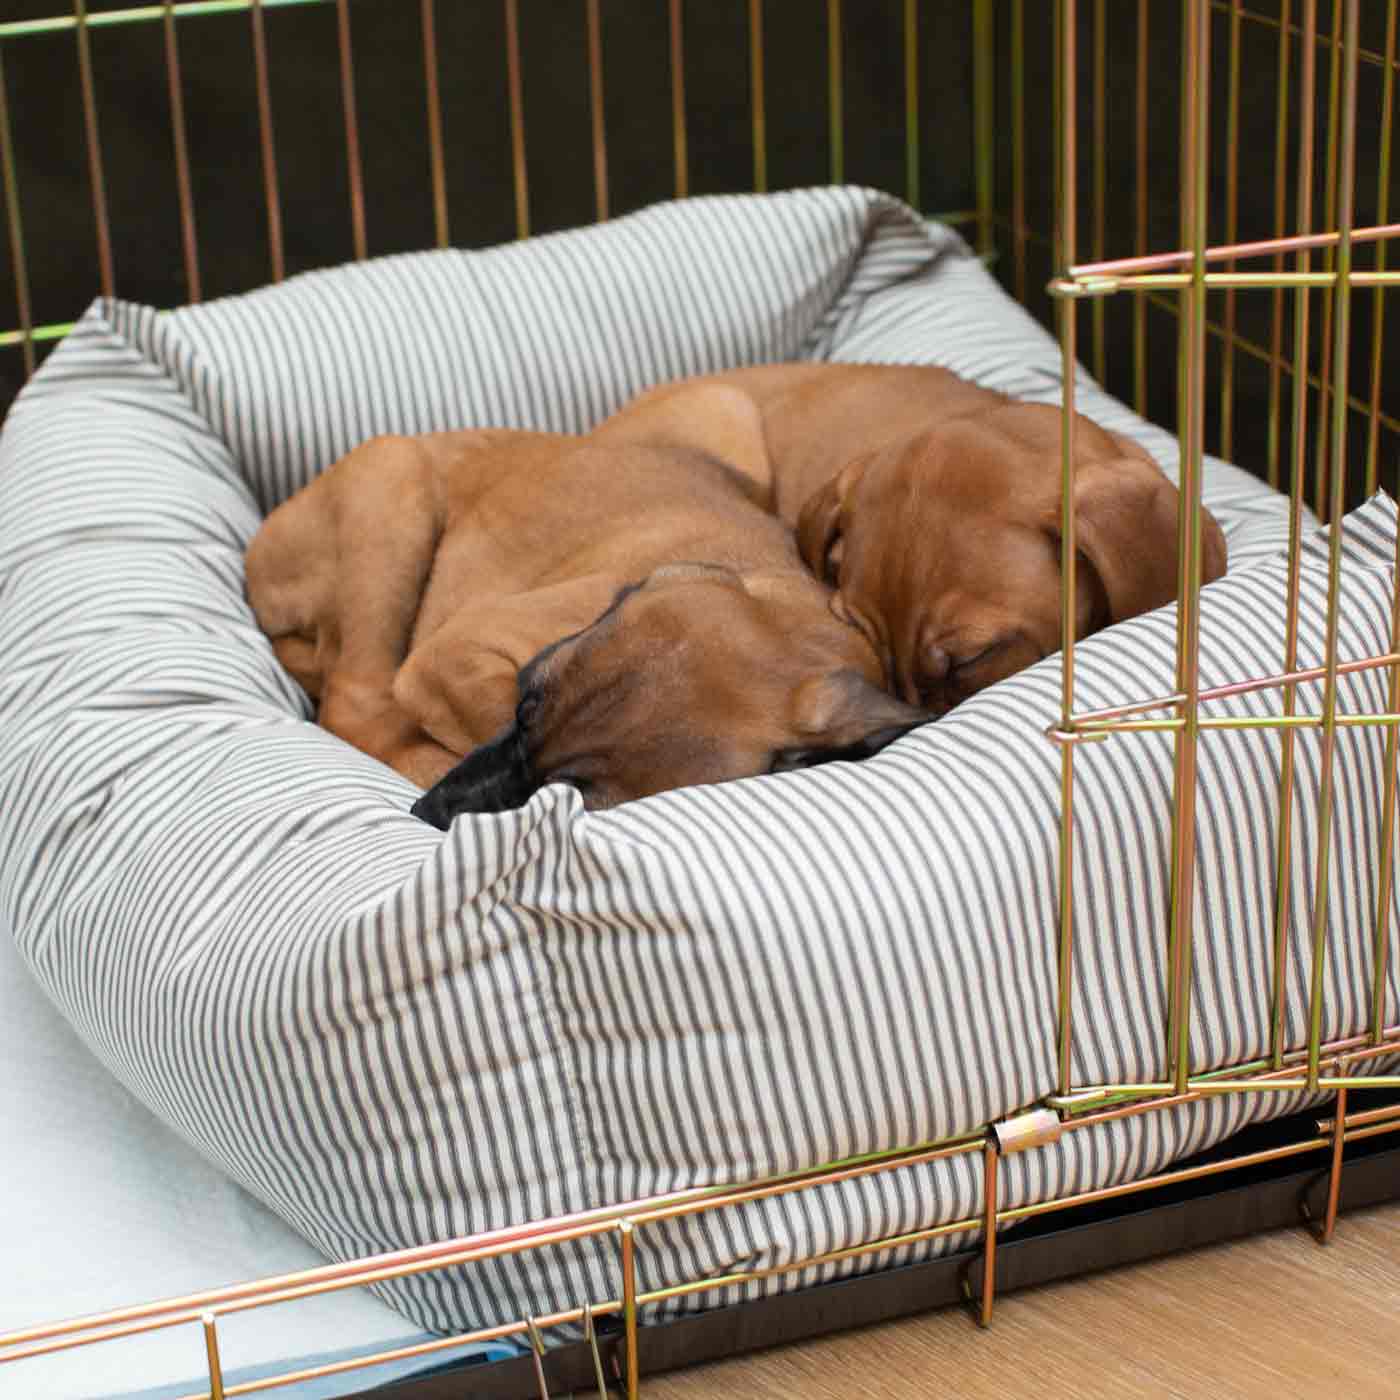 Discover Our Heavy-Duty Dog Crate With Regency Stripe Cosy & Calming Puppy Crate Bed Set! The Perfect Crate Bed For Pet Burrow. Available To Personalise Here at Lords & Labradors